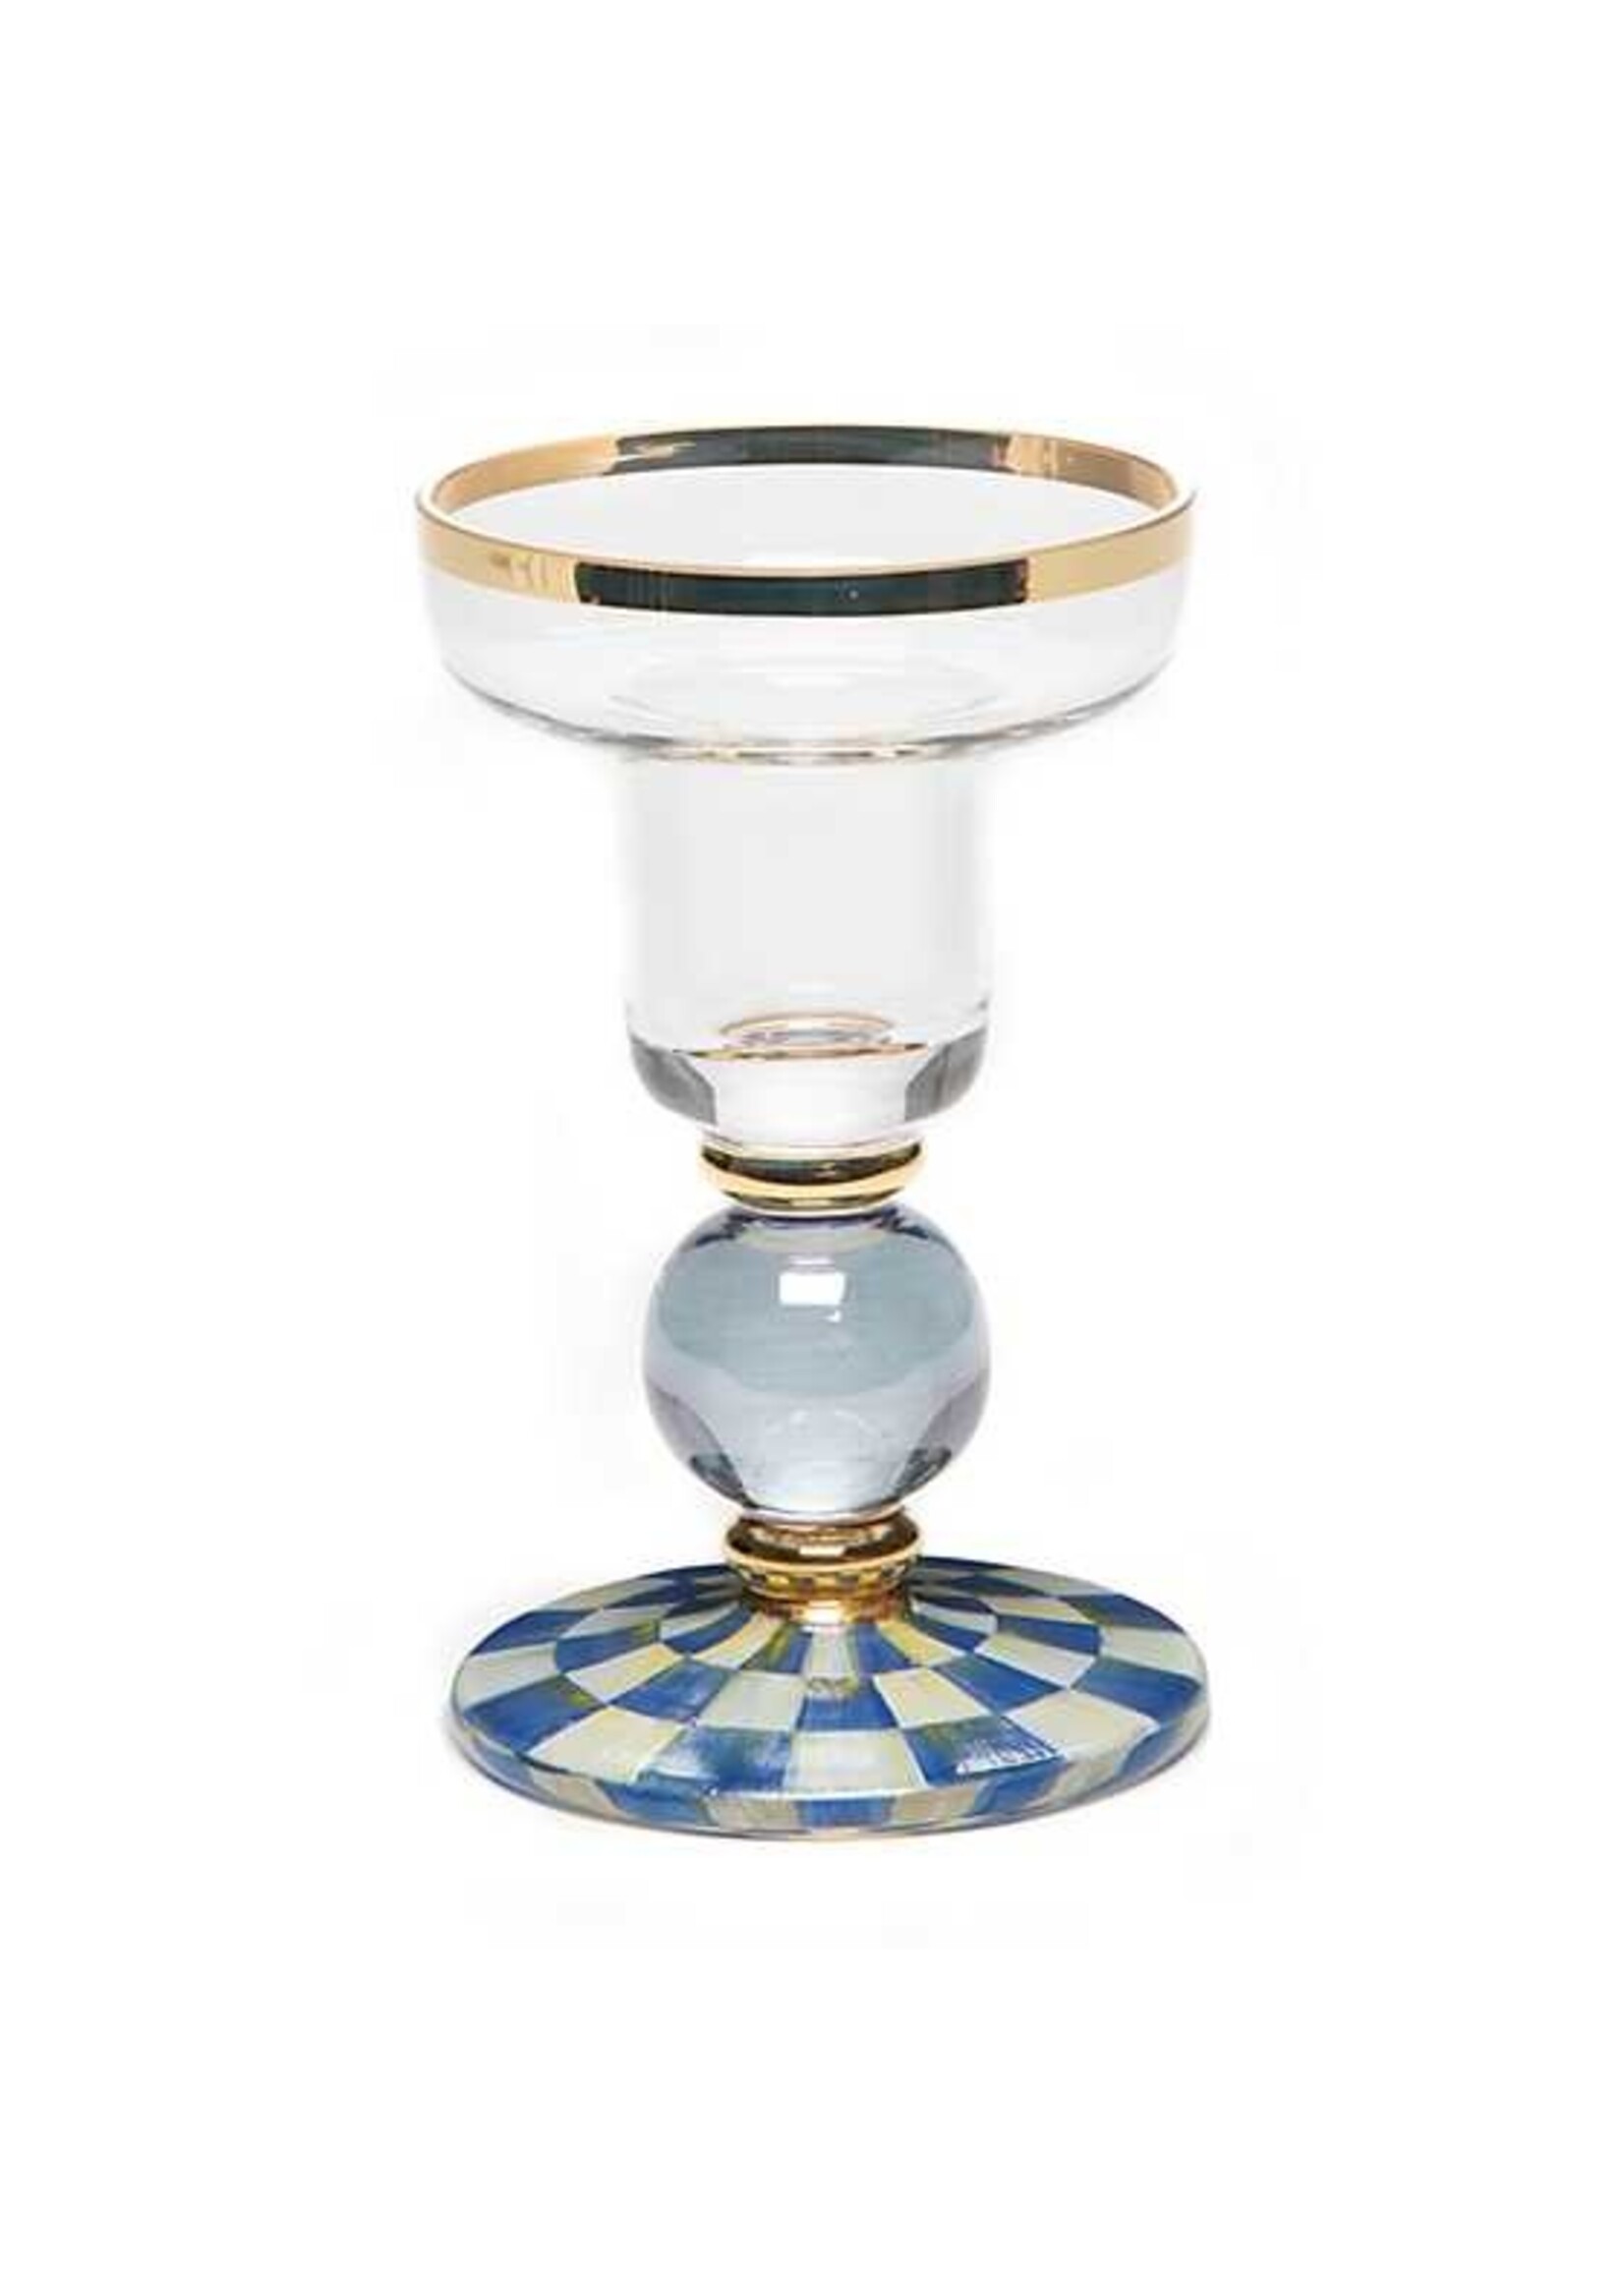 MacKenzie-Childs Royal Check Sphere Candlestick - Small